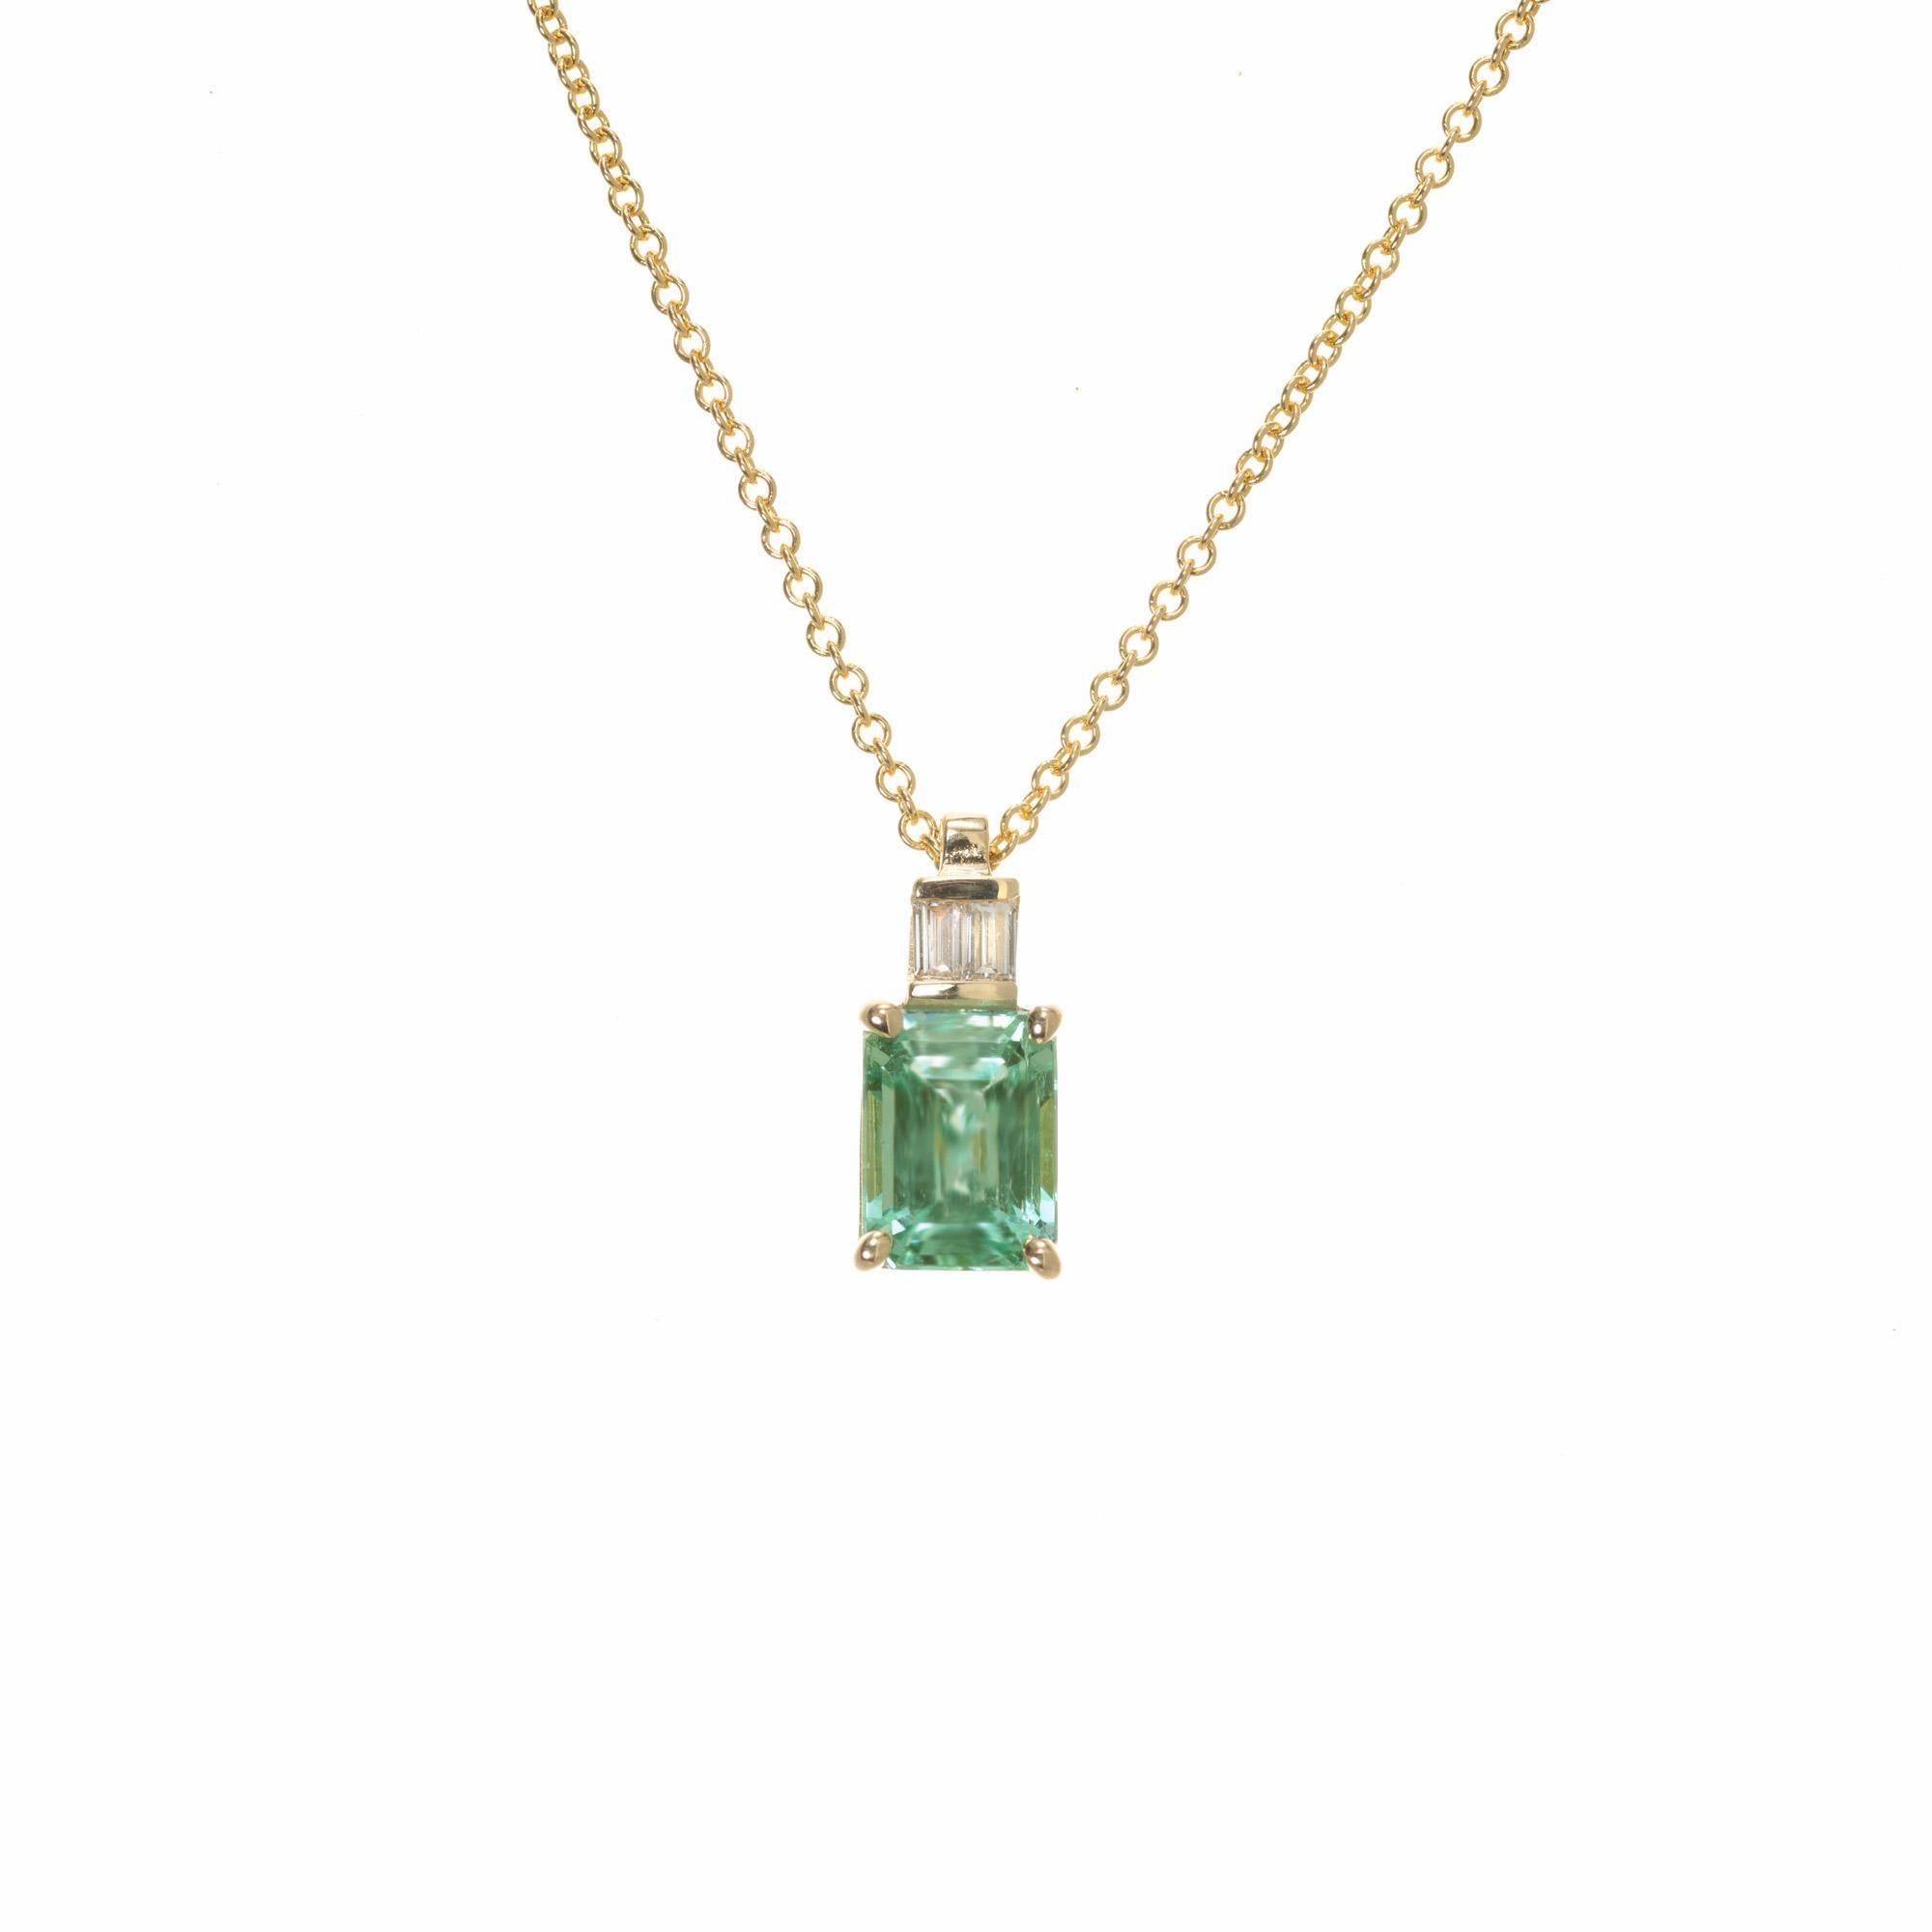 Natural bluish green 1.89 carat emerald and diamond pendant necklace. This rare GIA certified emerald is from a 1920's estate and placed into a 14k yellow gold setting with 2 straight baguette accent diamonds by the Peter Suchy Workshop. A 16 inch